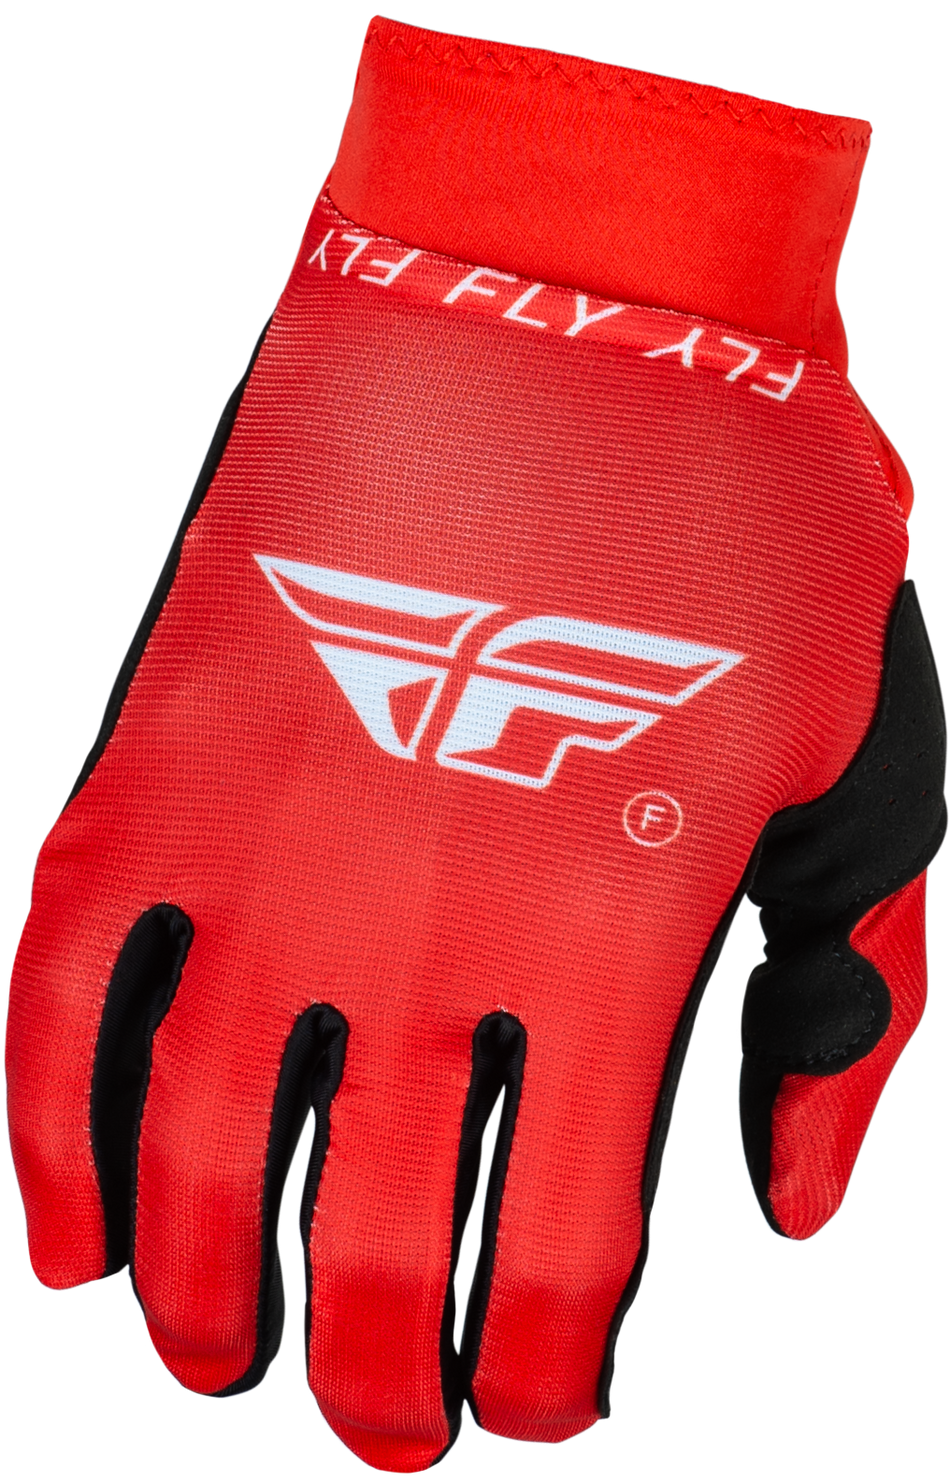 FLY RACING Pro Lite Gloves Red/White 2x 377-0442X